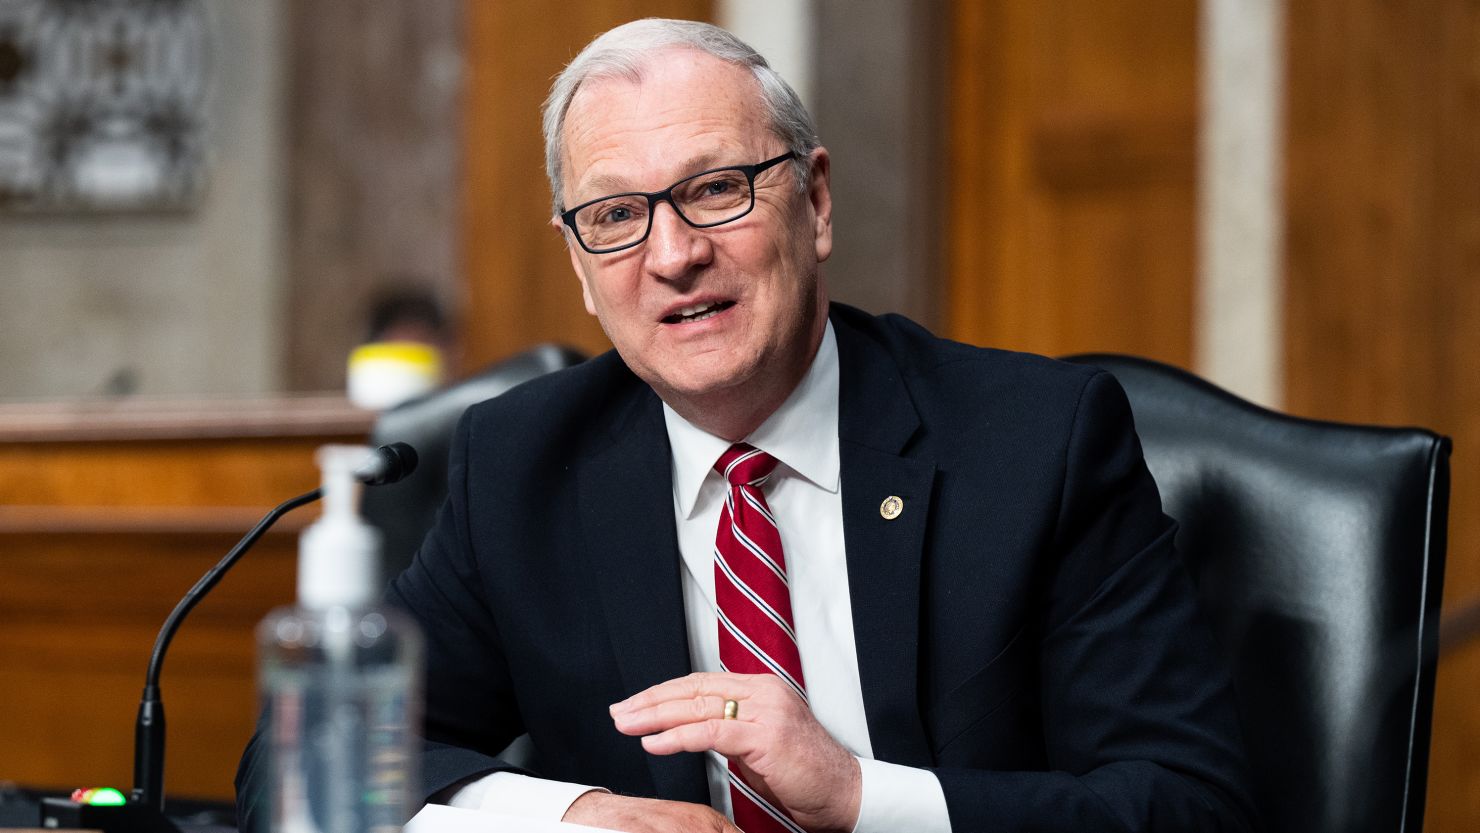 Sen. Kevin Cramer, a Republican from North Dakota, speaking at a Senate Armed Services Committee Hearing.